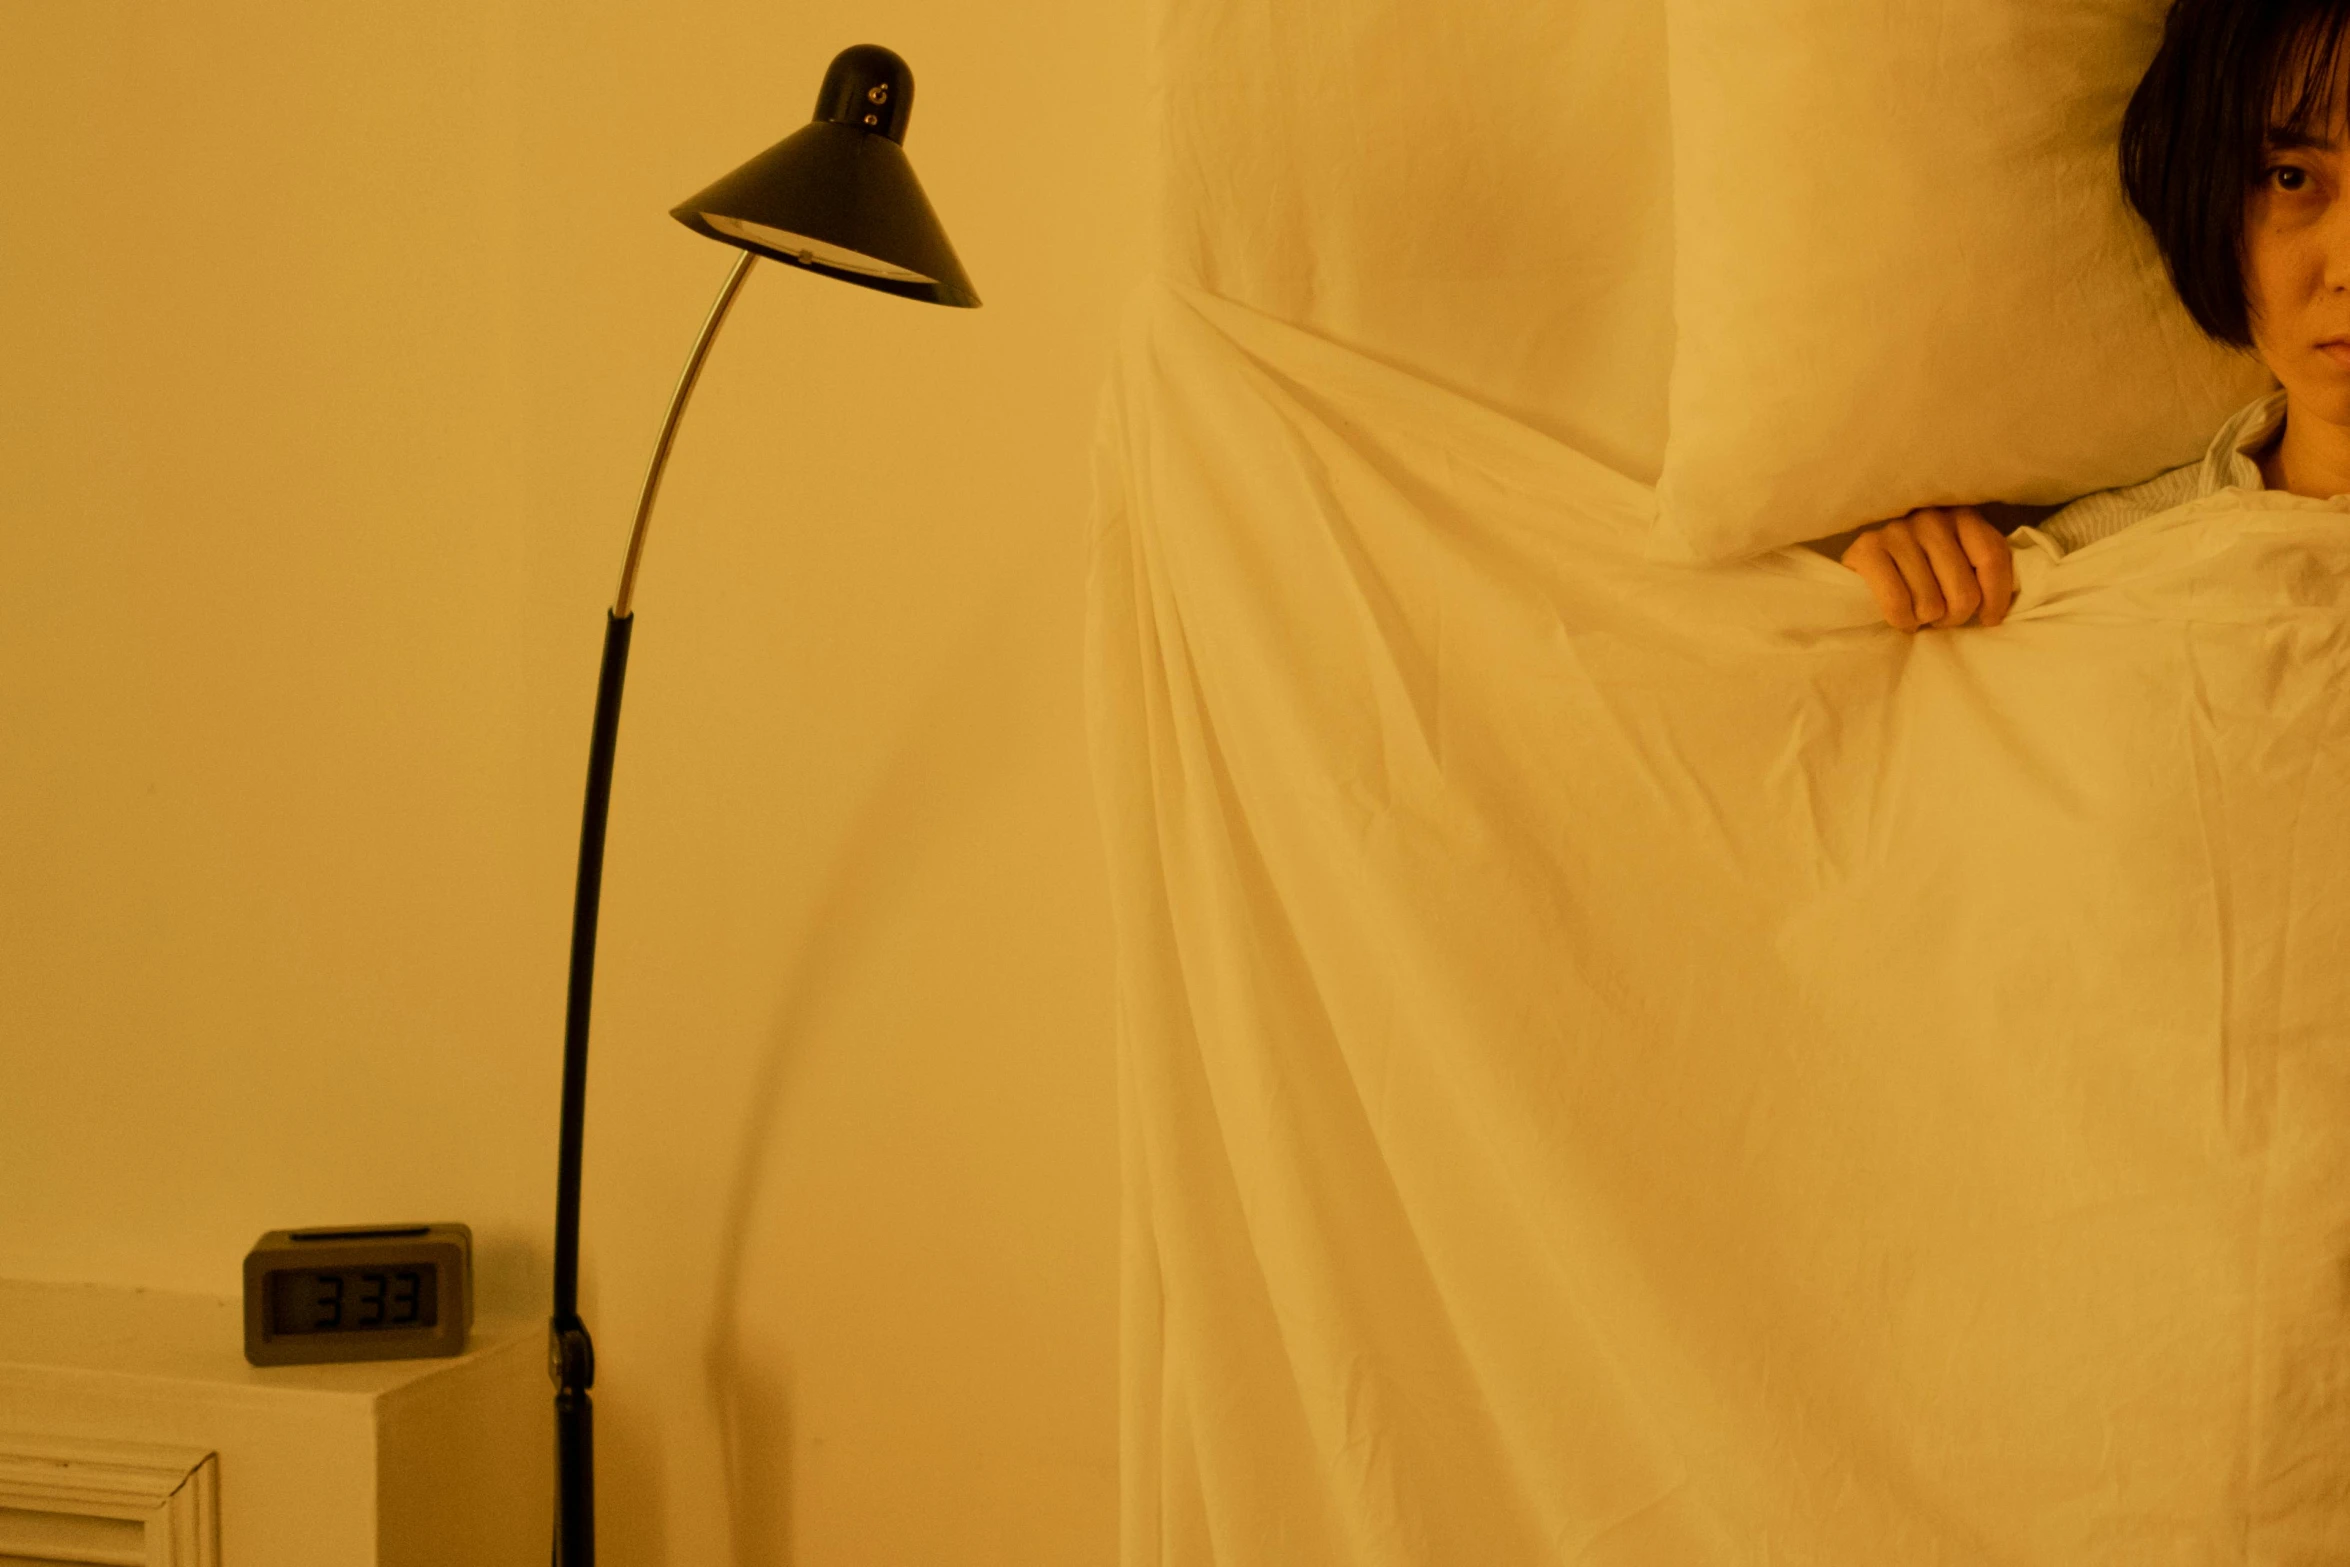 young woman hiding behind sheets in bed